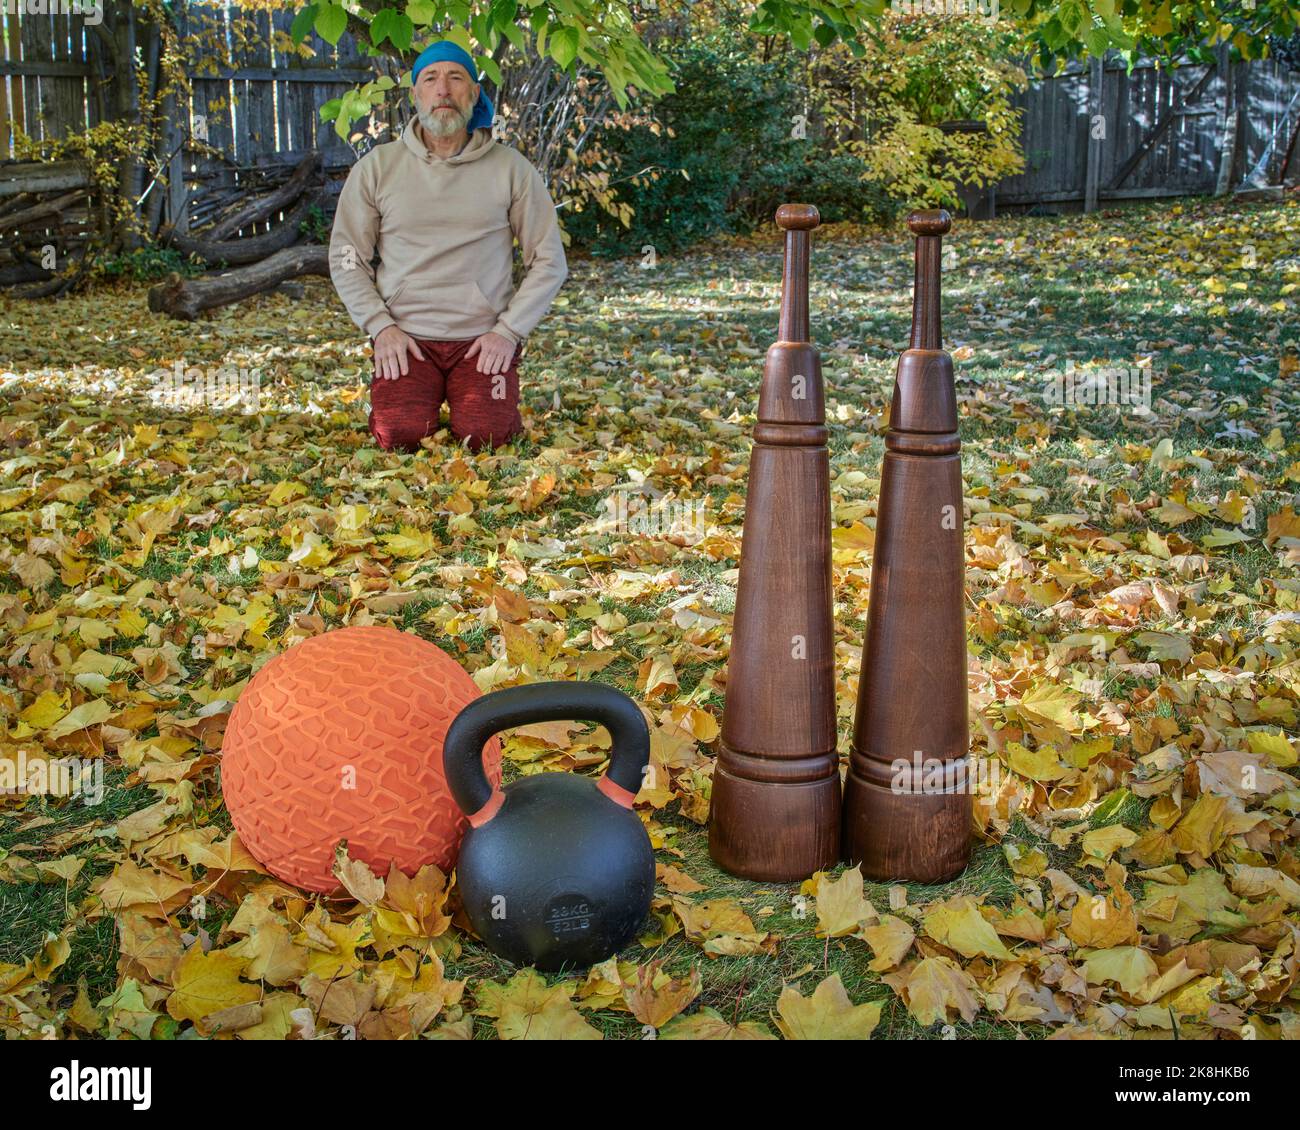 heavy iron kettlebell, slam ball and wooden Persian clubs in a backyard with a senior male seiza sitting in a background, fall scenery Stock Photo